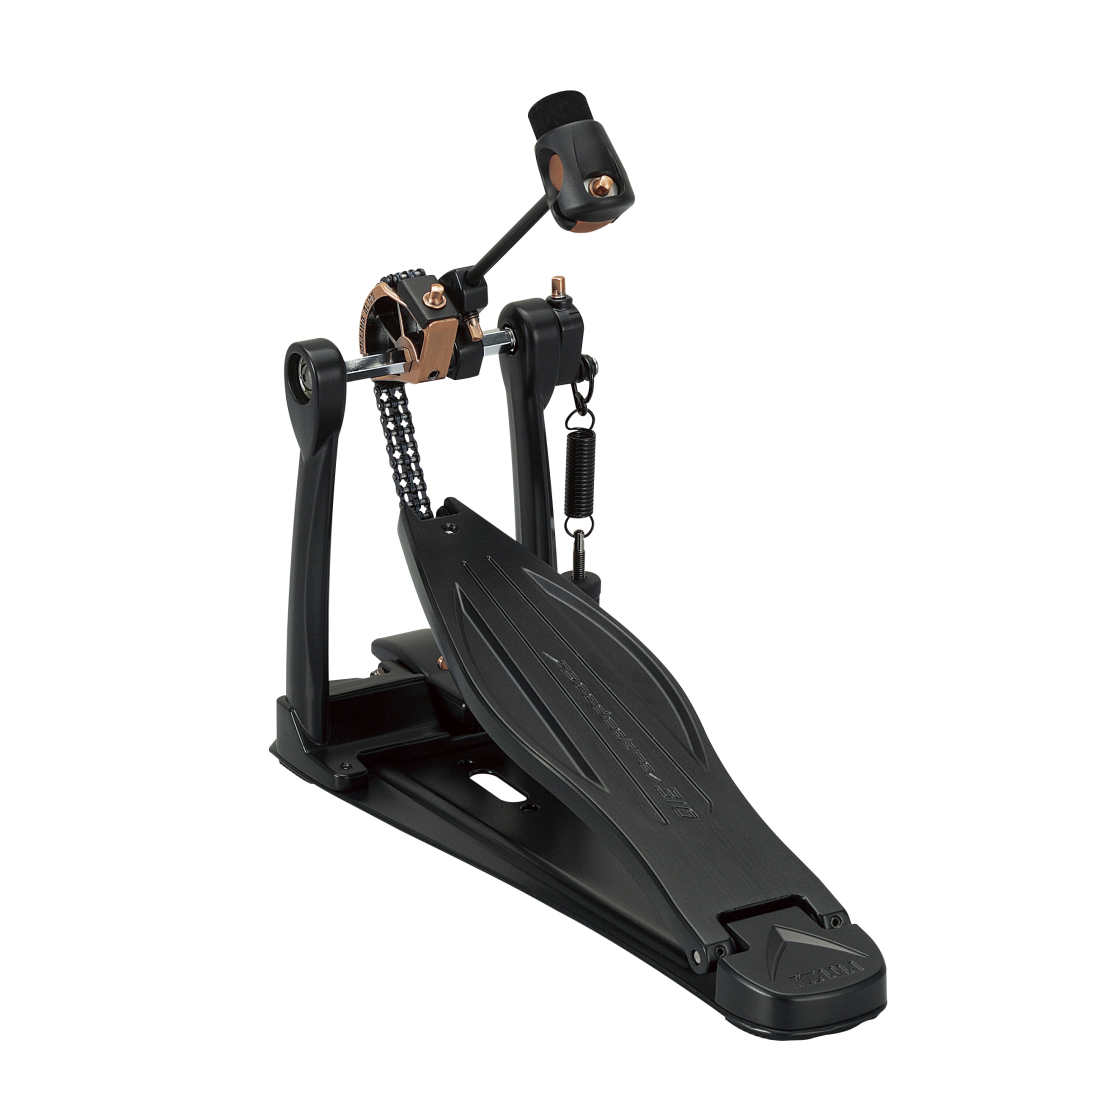 Speed Cobra 310 Black and Copper Edition - Single Pedal